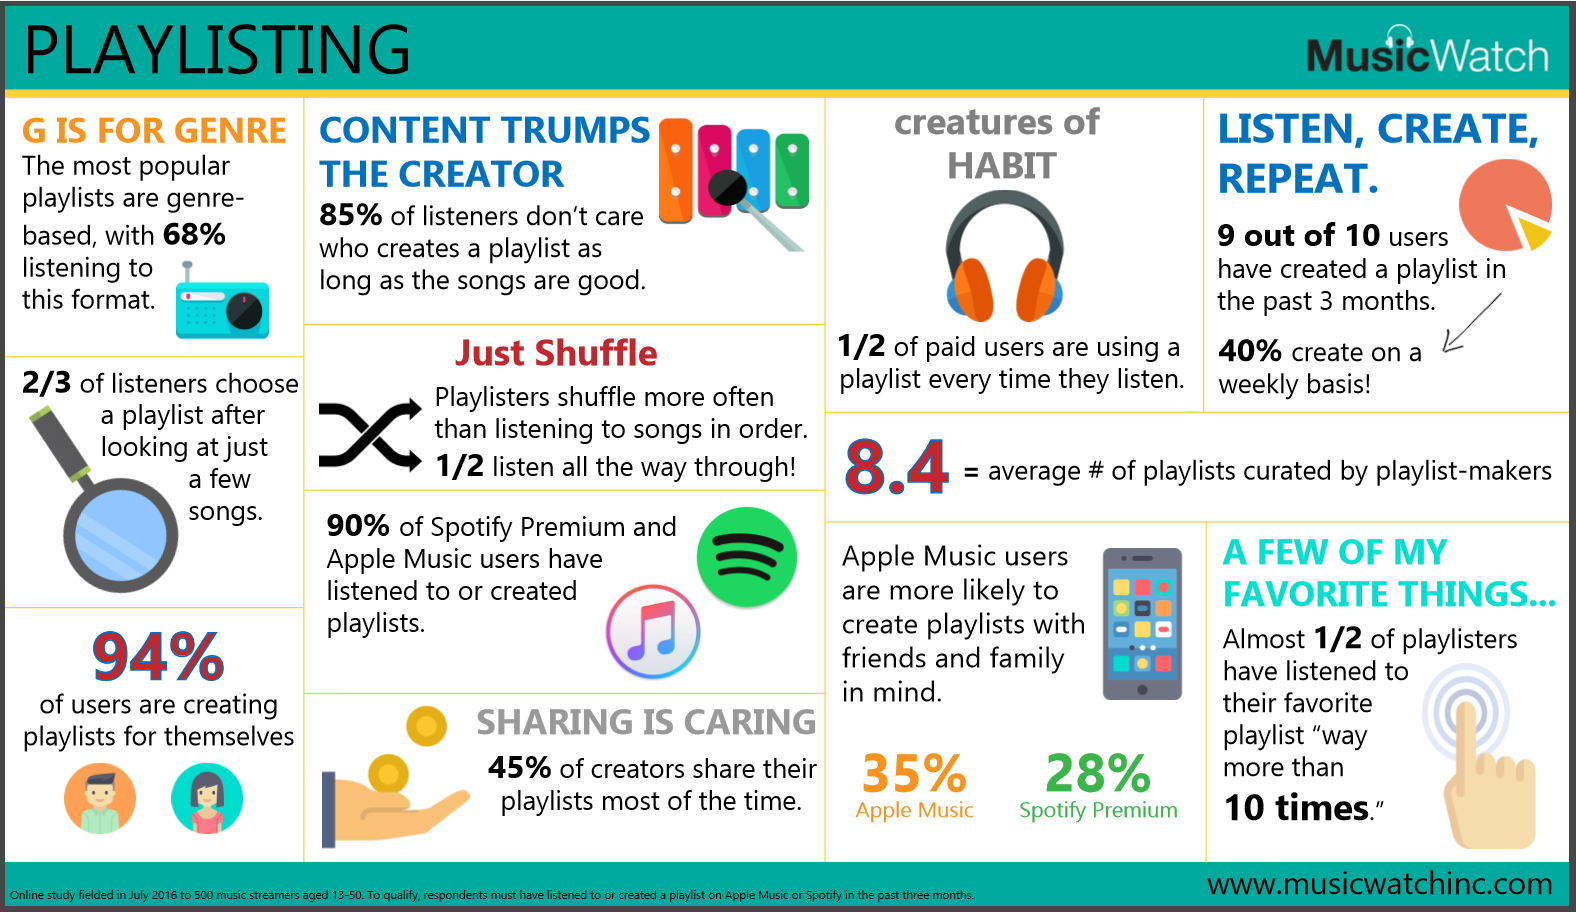 MusicWatch Playlisting Infographic 2016 08 FINAL PNG